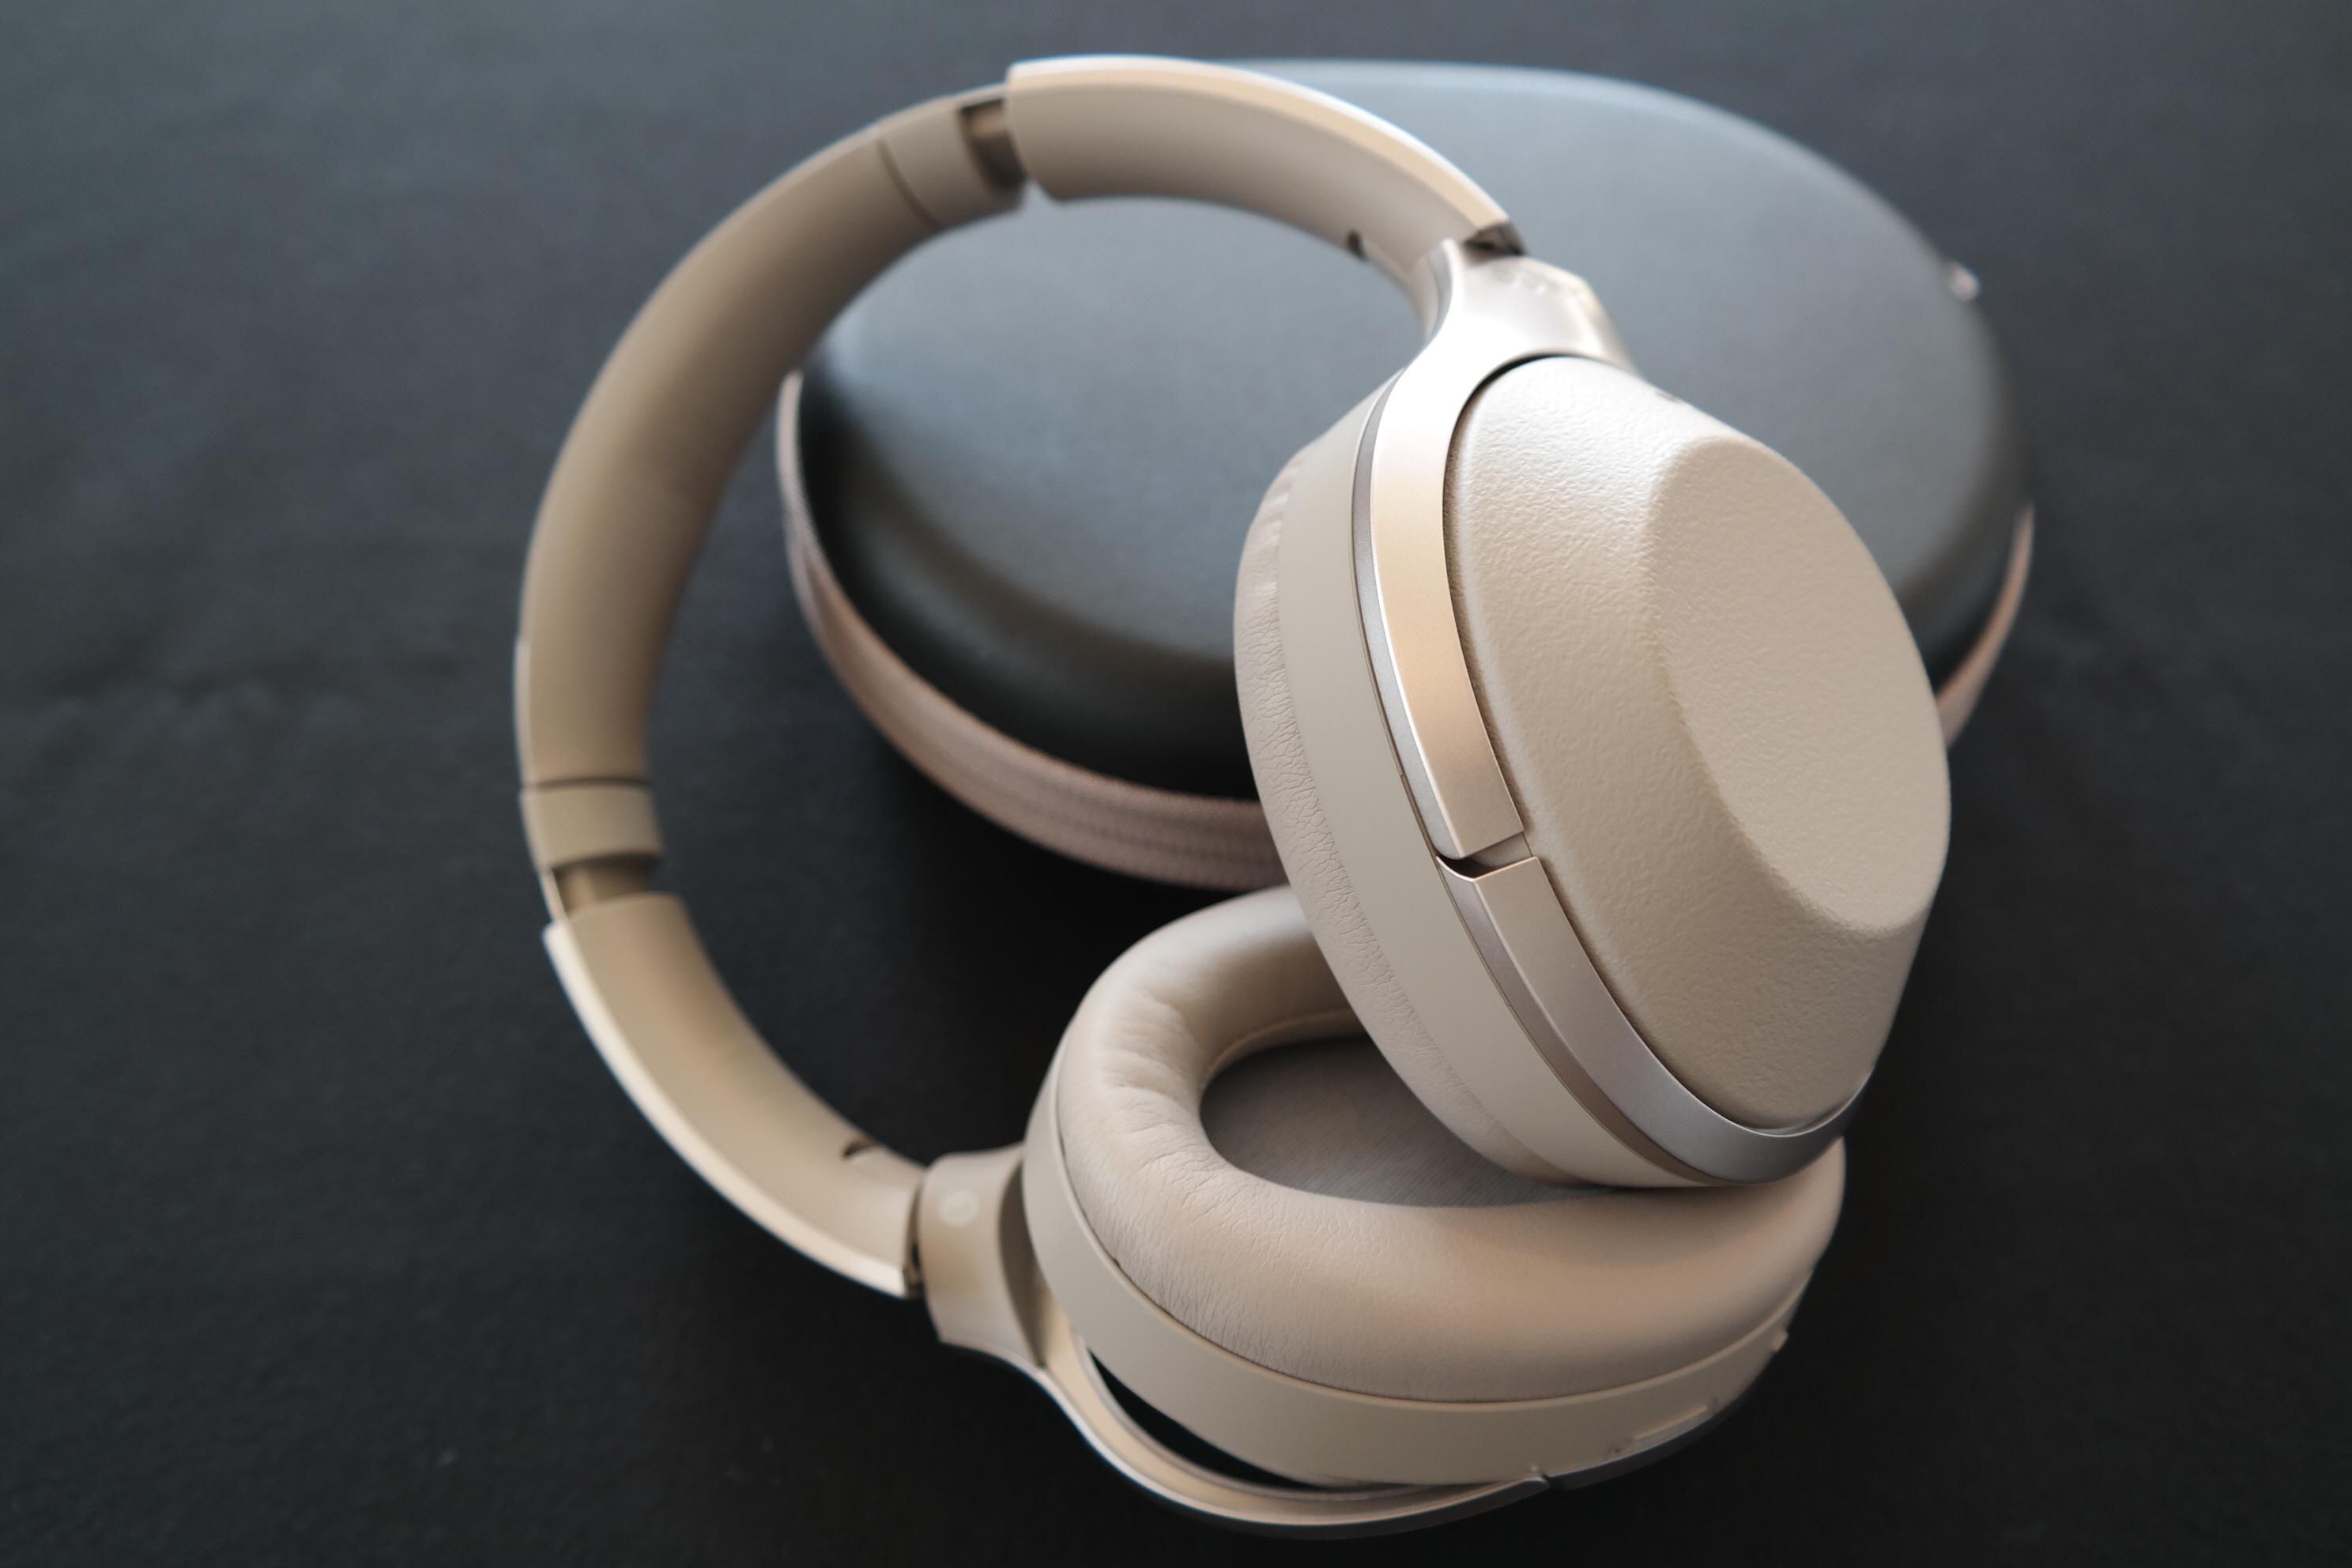 Sony WH-1000XM2 review: Sony's top noise-cancelling headphones match ...